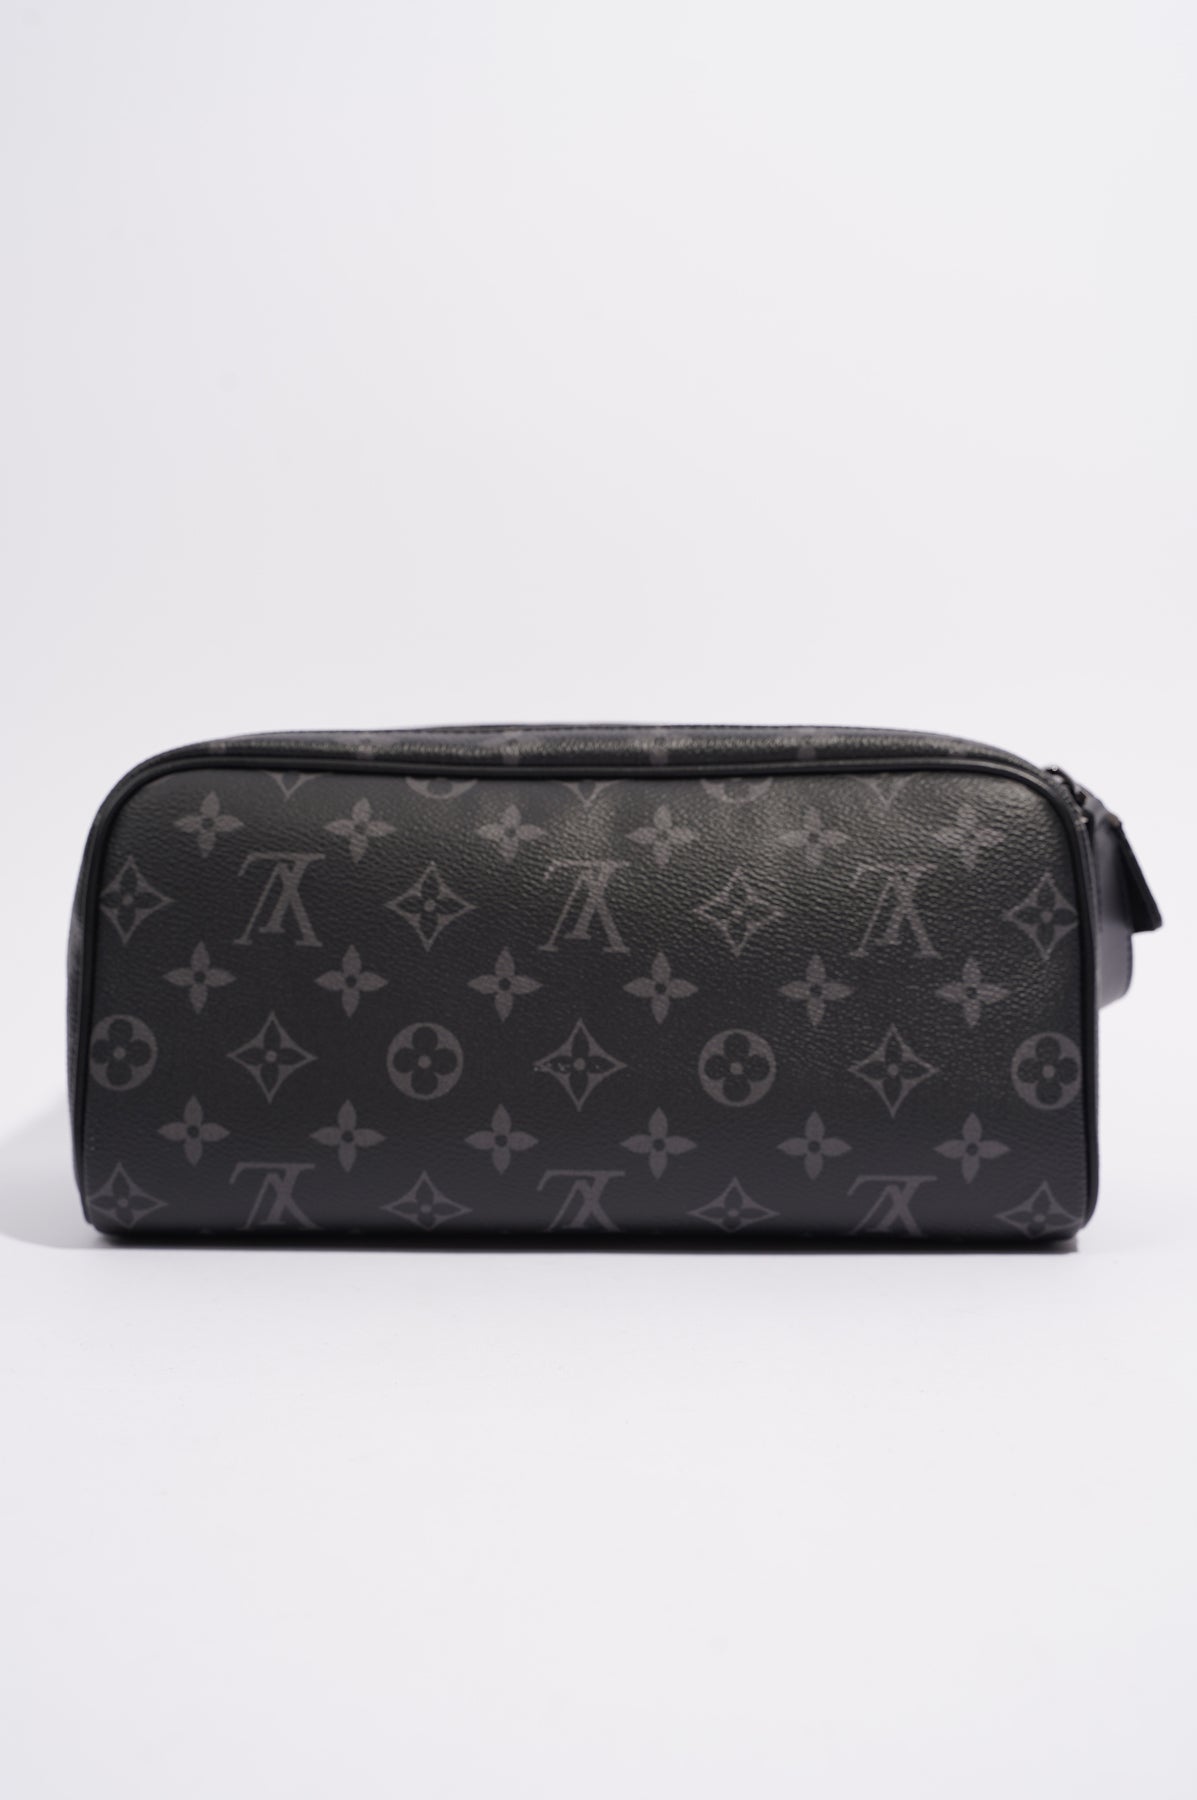 lv luggage for men